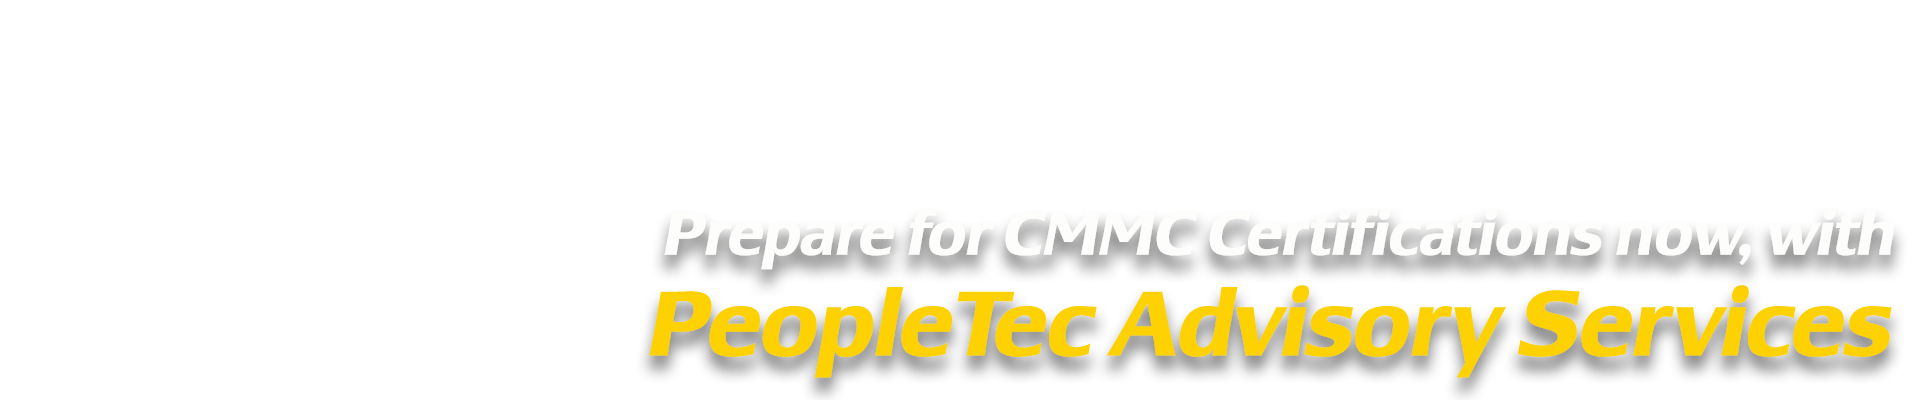 PeopleTec_Advisory_Services-Banner-Text